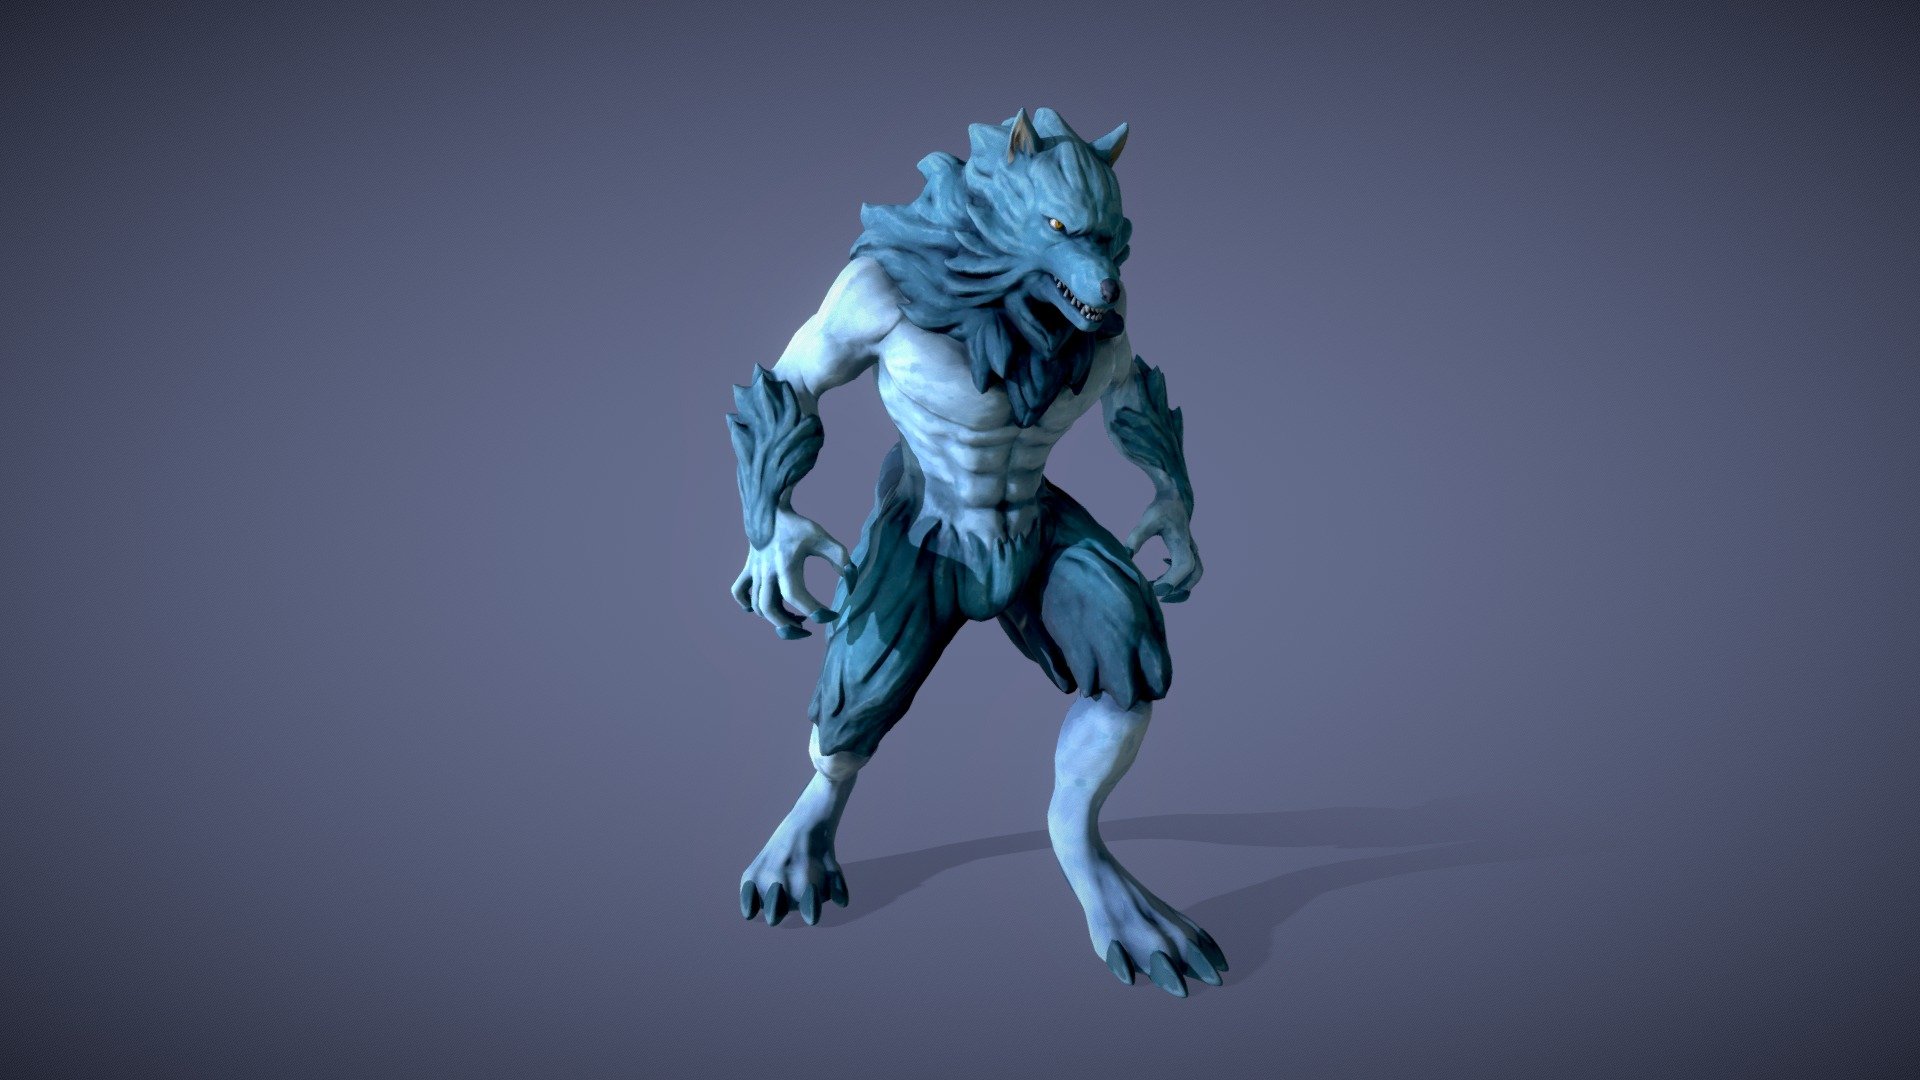 Player character for Alpha Daddy Interactive's game Full Moon Fears. 

Play the game:
https://zeliotl.itch.io/full-moon-fears - Full Moon Fears: Werewolf - Download Free 3D model by Marcus Rain Skoog (@mistrain) 3d model